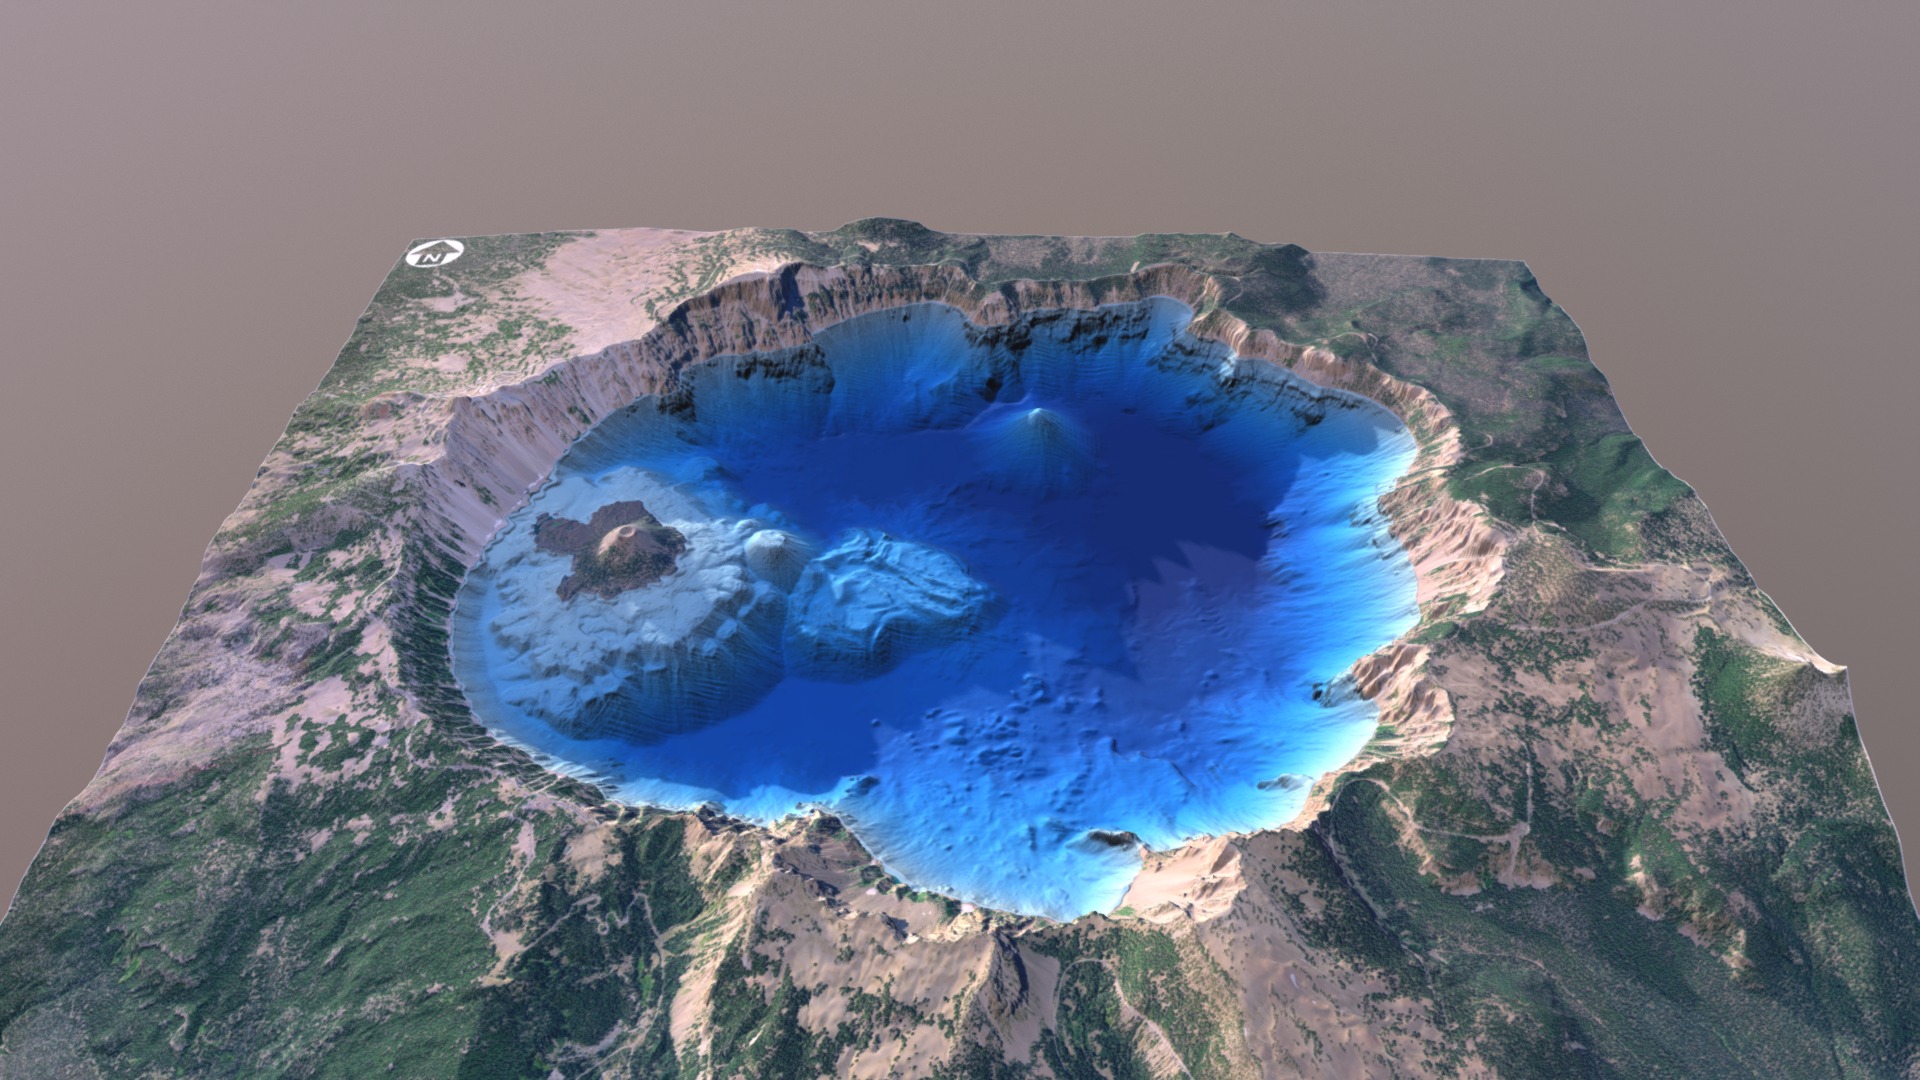 3D model Crater Lake, Oregon – Bathymetry Surface - This is a 3D model of the Crater Lake, Oregon - Bathymetry Surface. The 3D model is about a view of a large crater.